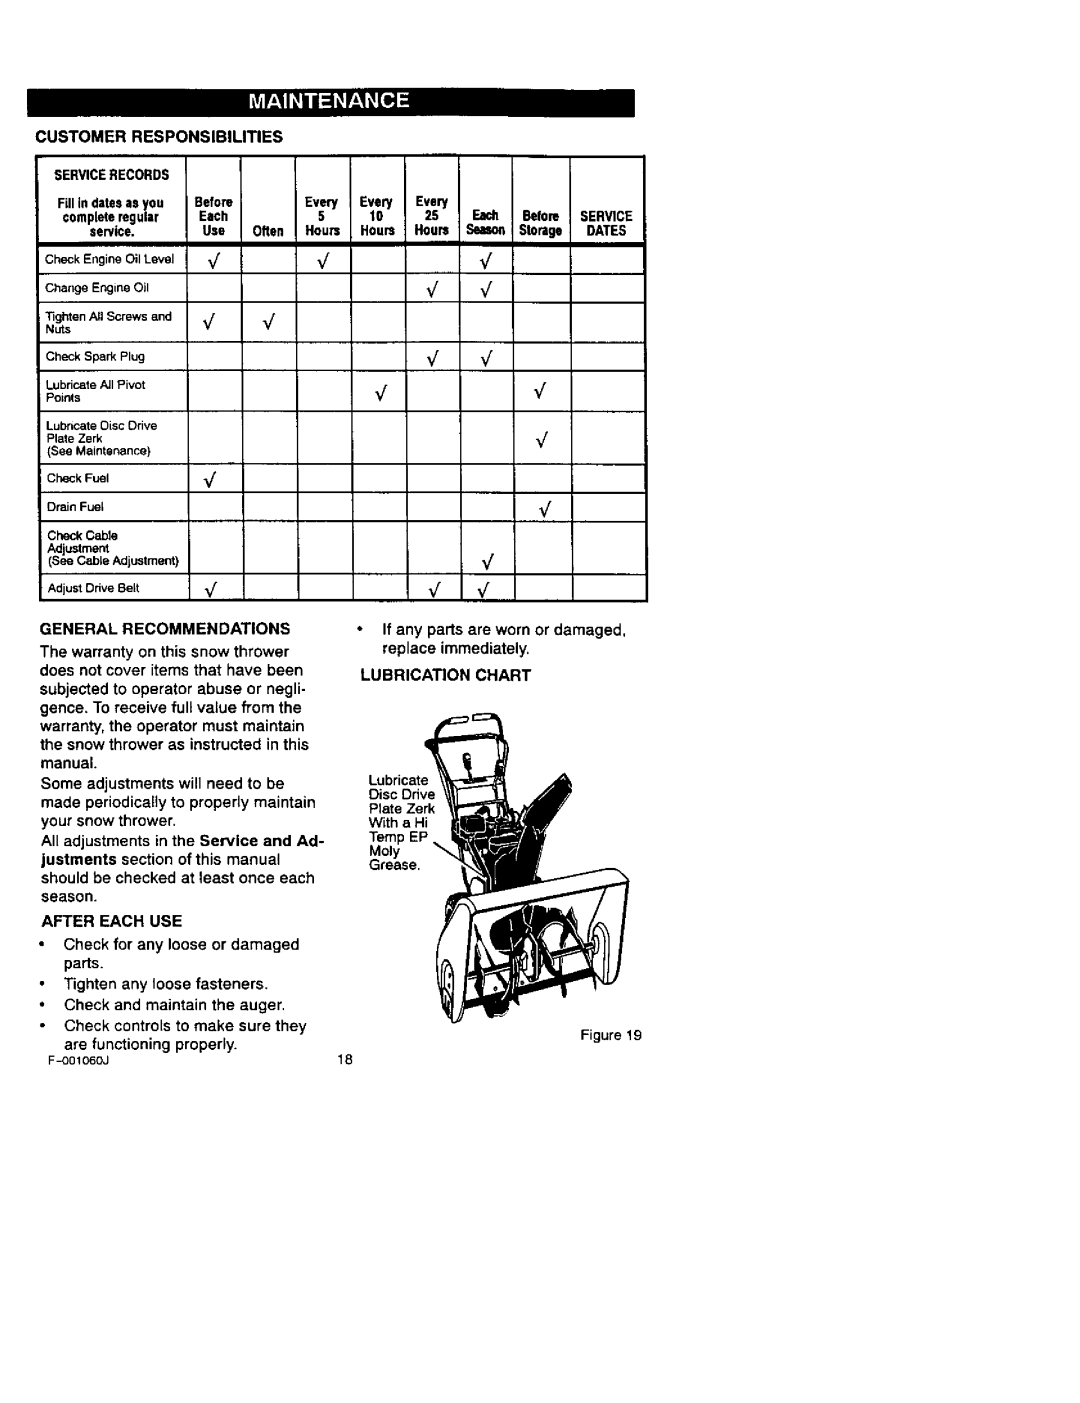 Craftsman 536.88113 Customer Responsibilities, General Recommendations, After Each USE, Lubrication Chart 